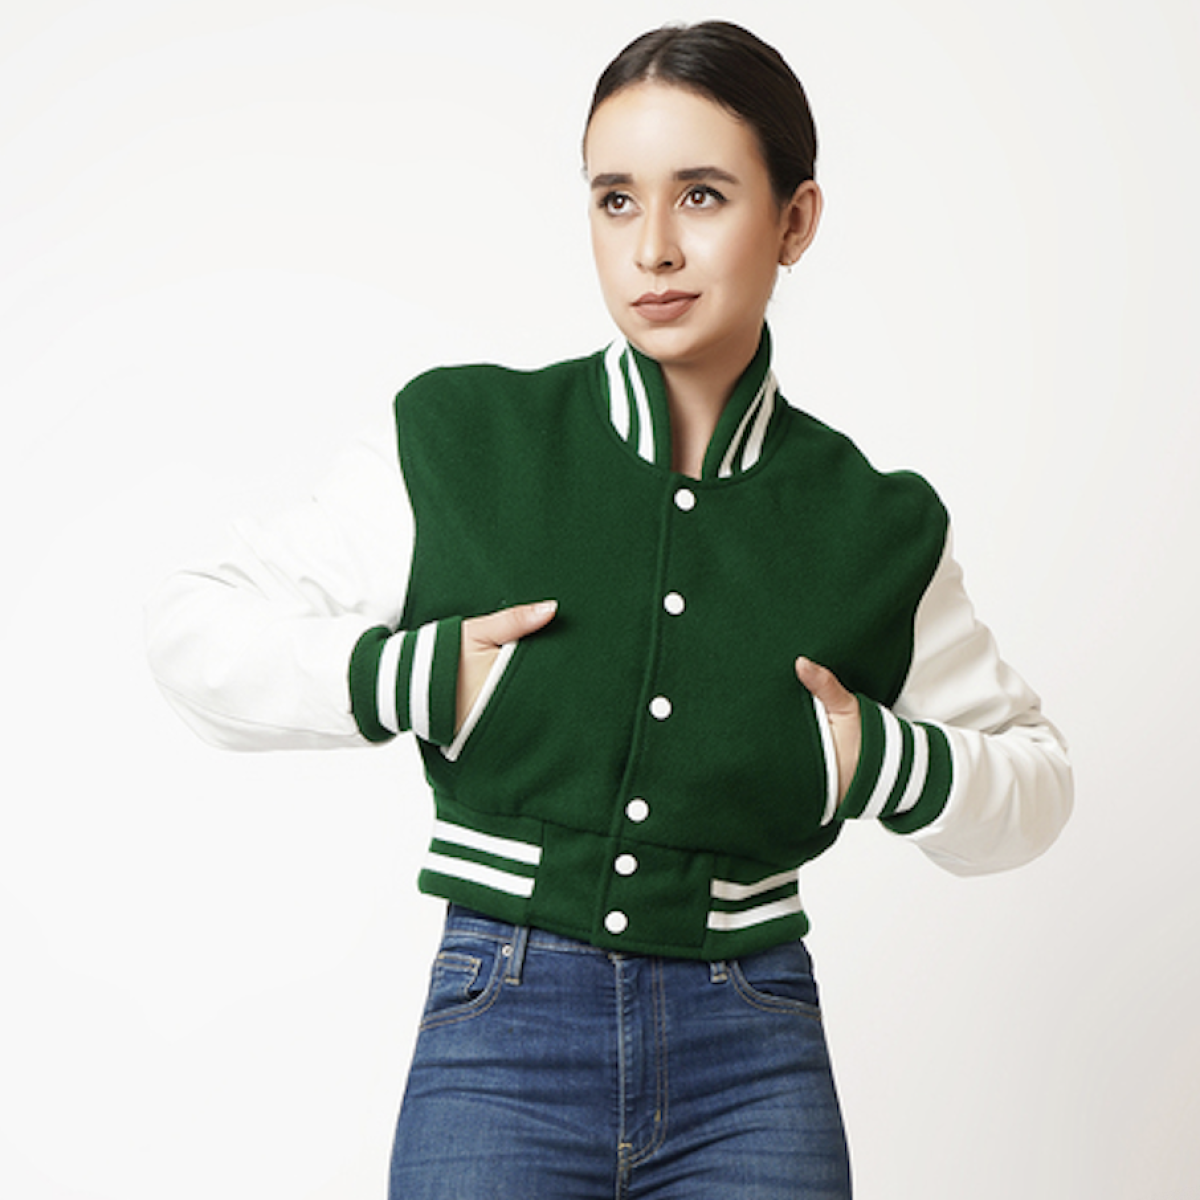 Women's Cropped Varsity Leather Jacket In Green & White Sleeves